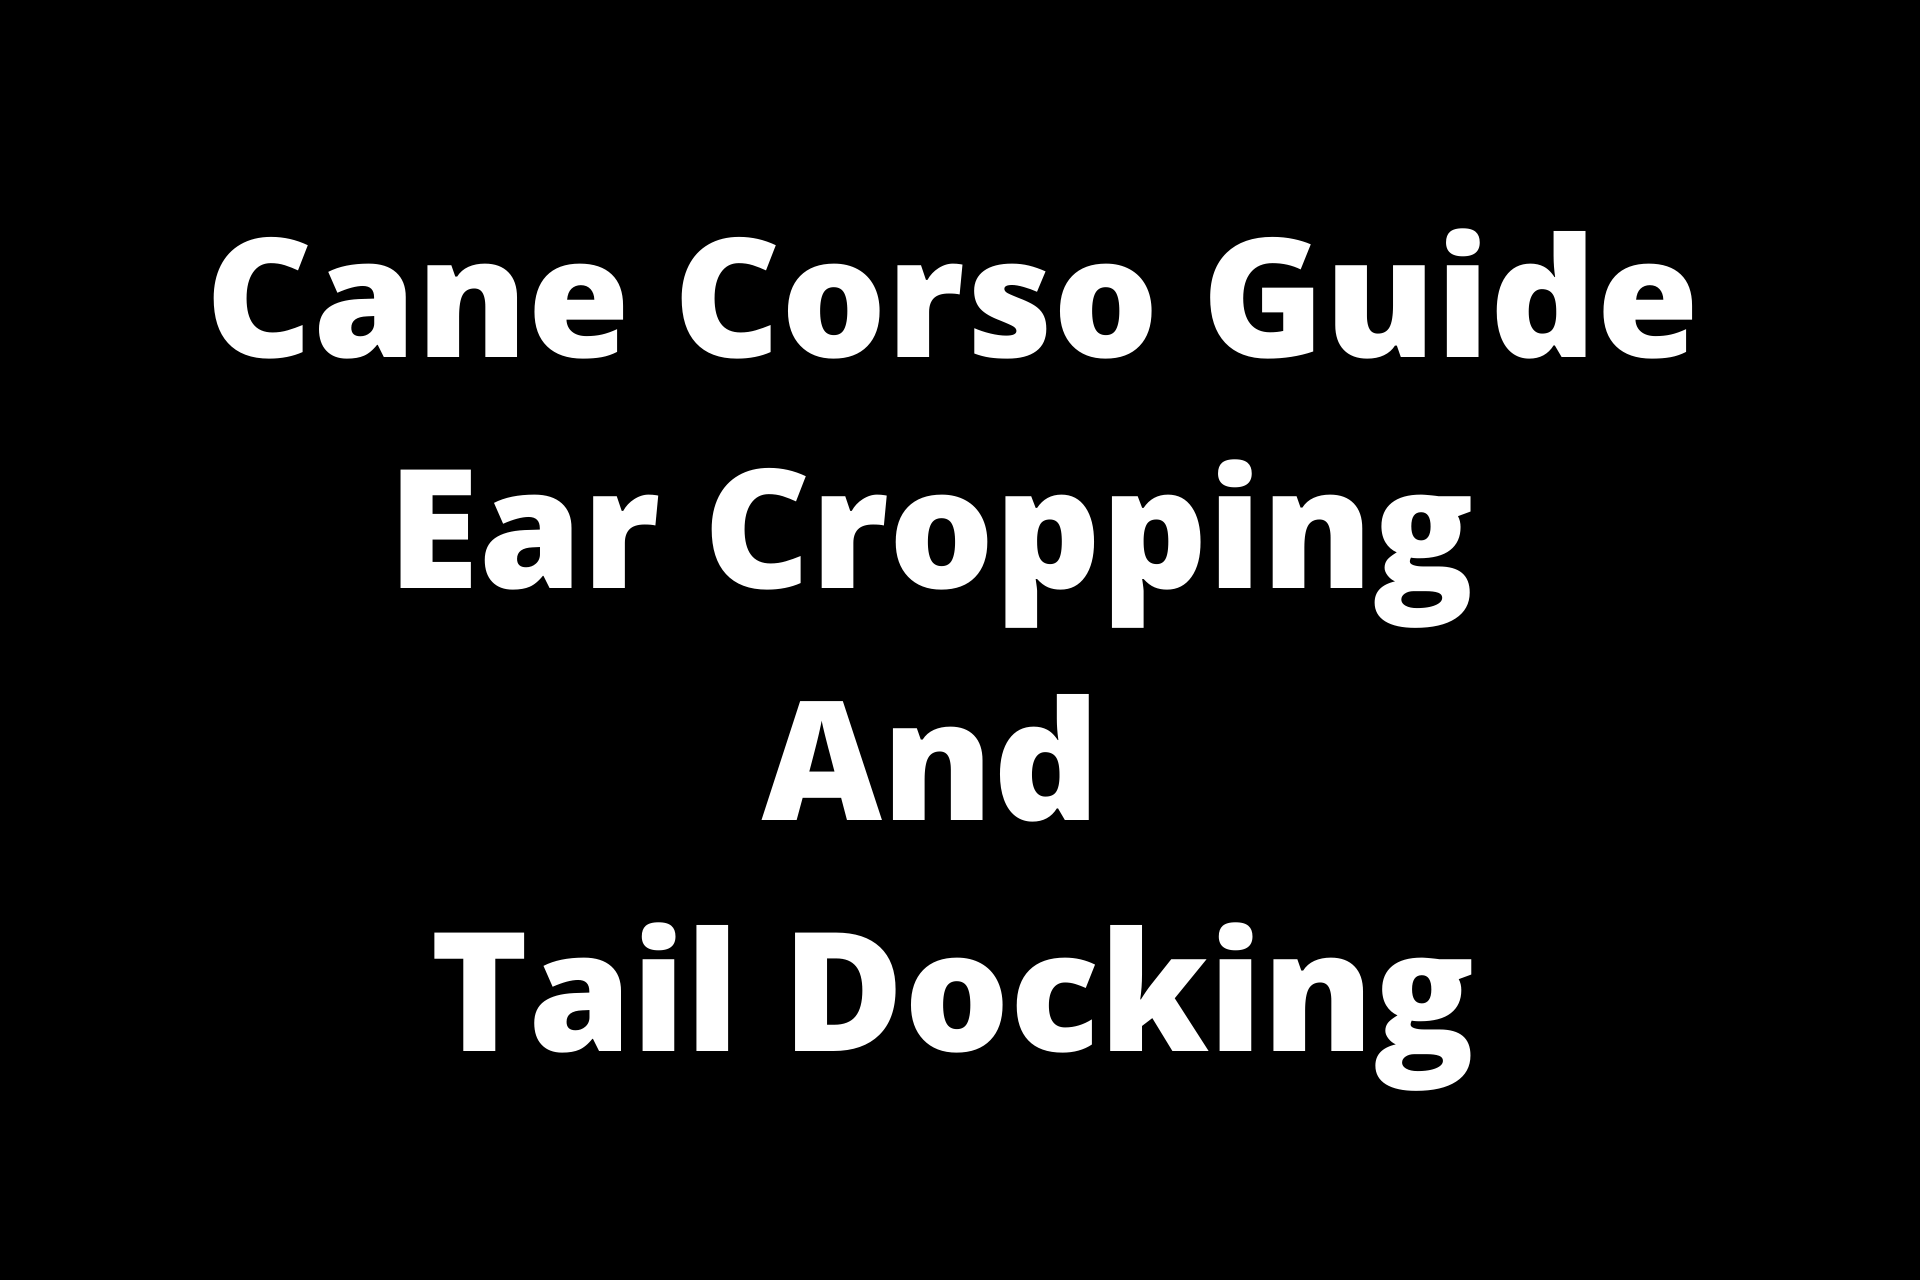 Cane Corso Ear Cropping And Tail Docking